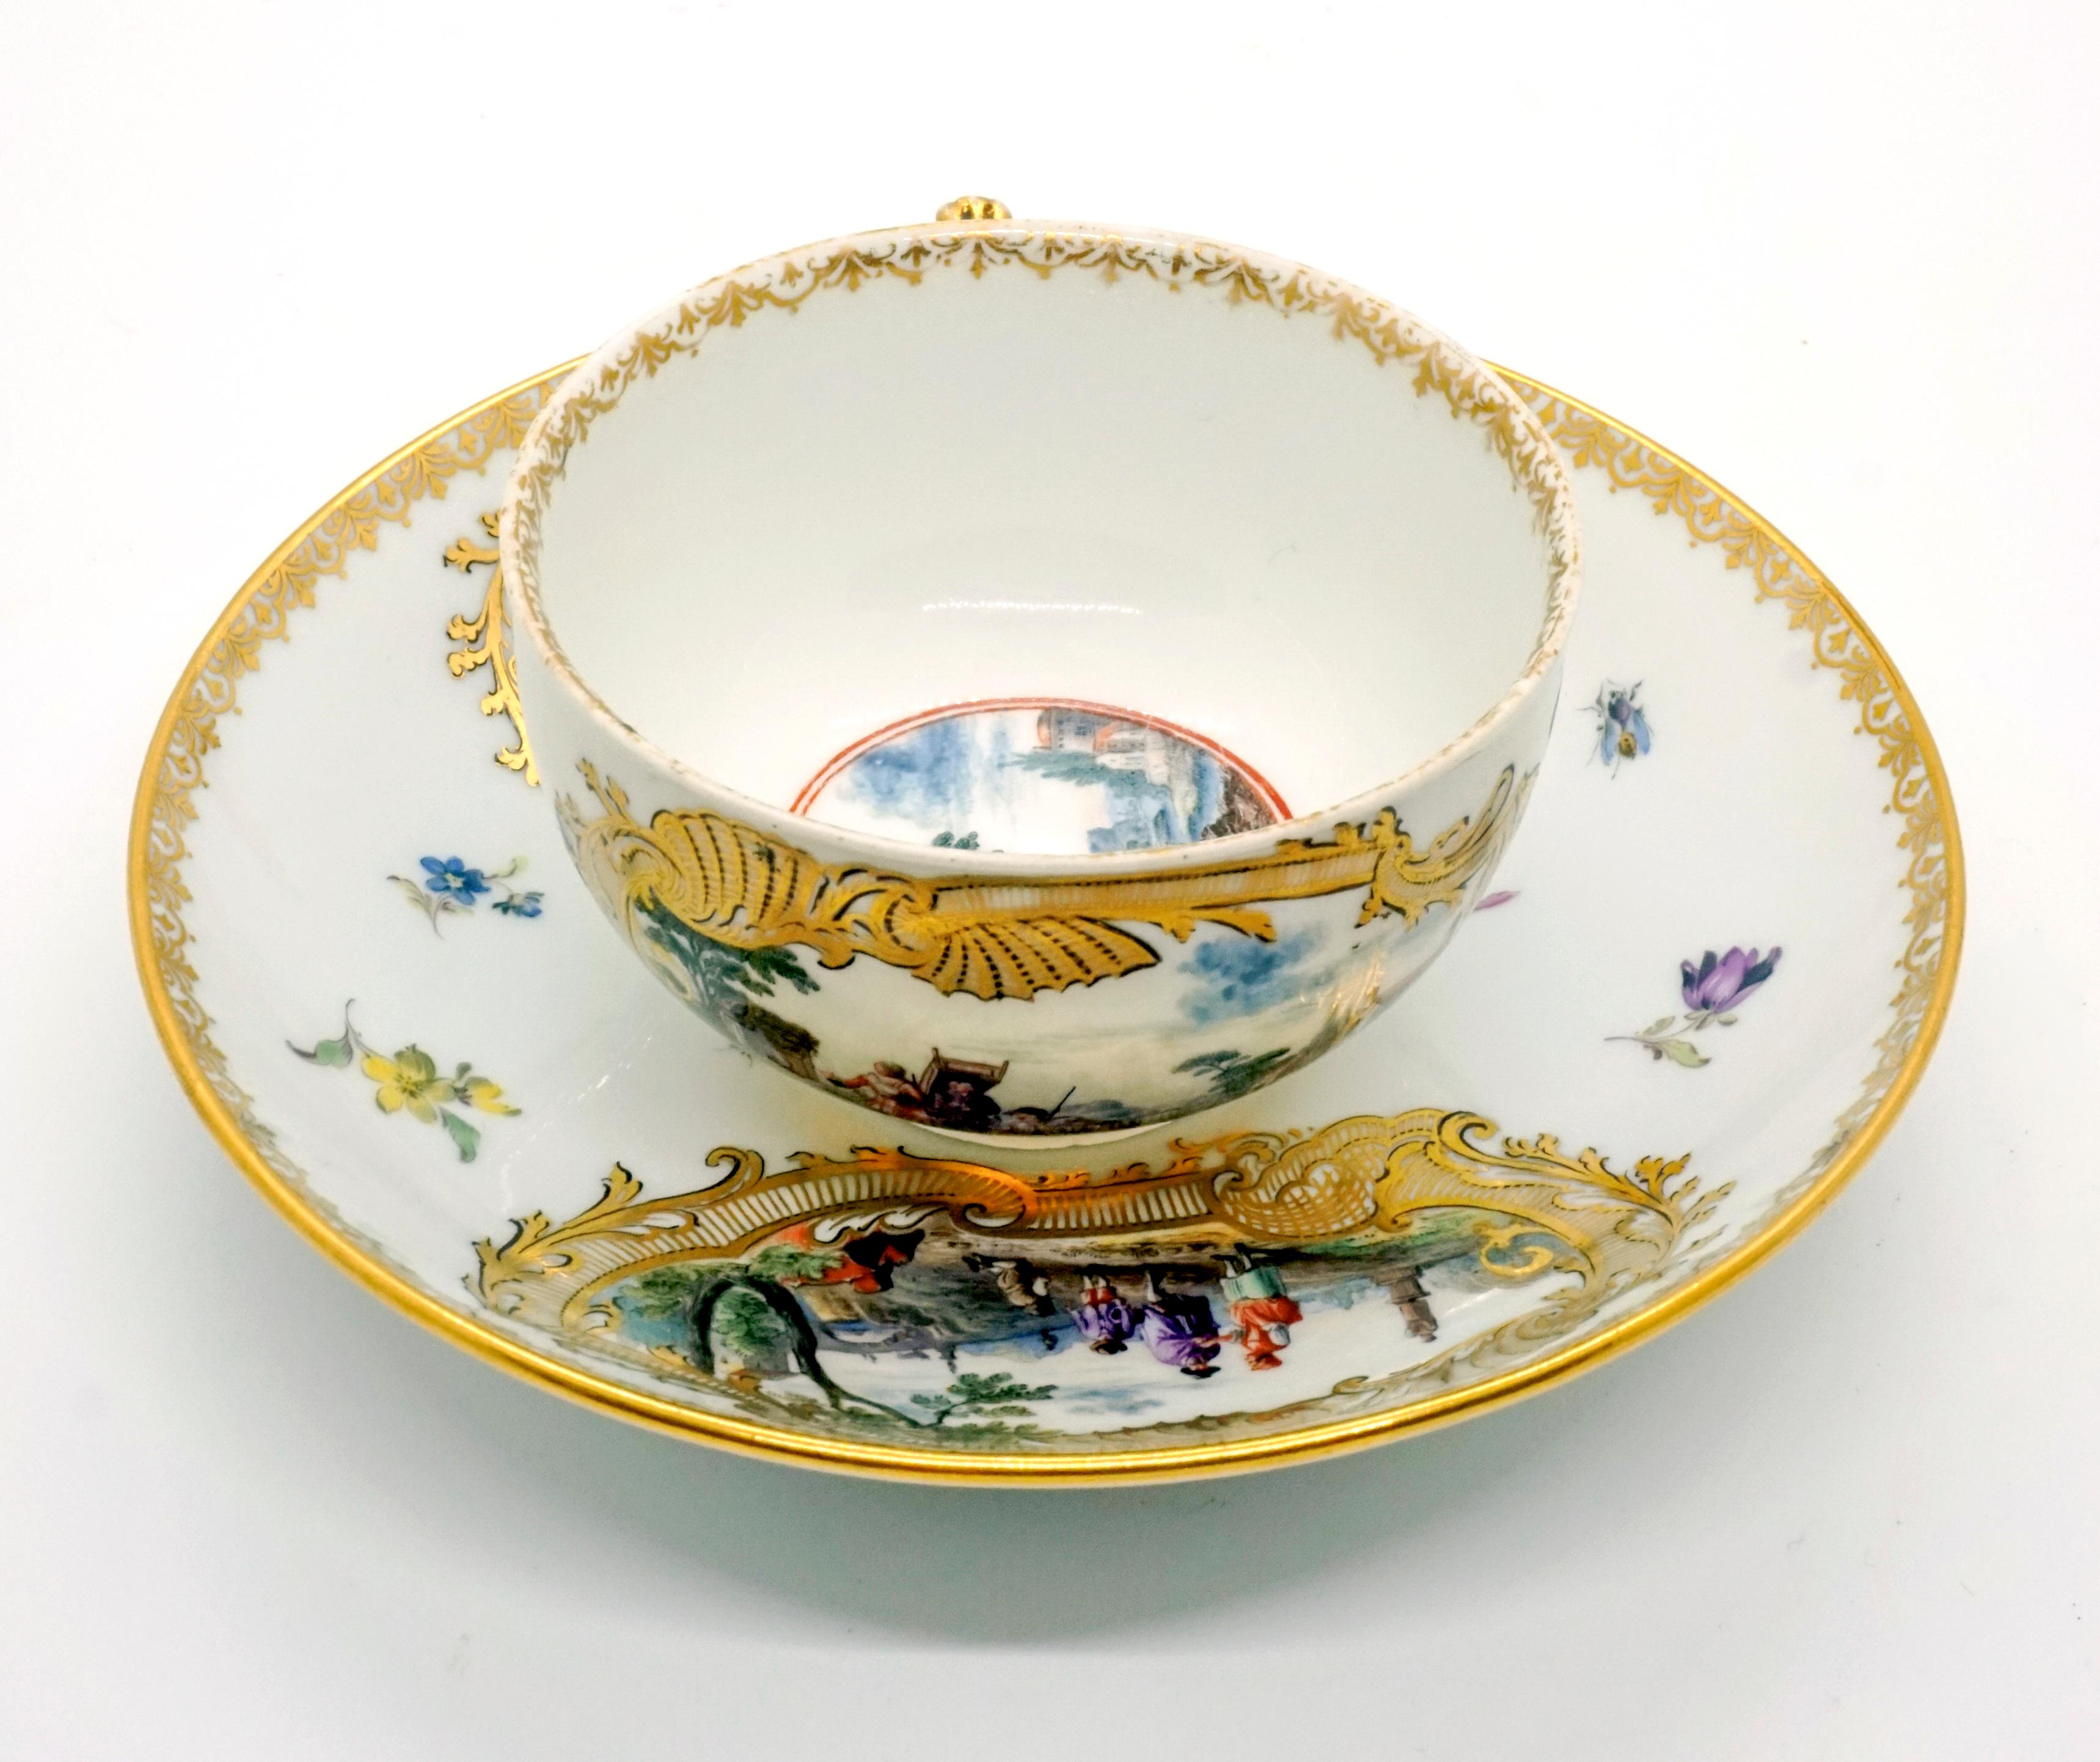 Rococo Eary 19th Century Meissen Cup and Saucer with Kauffahrtei Scenes and Gold Decor